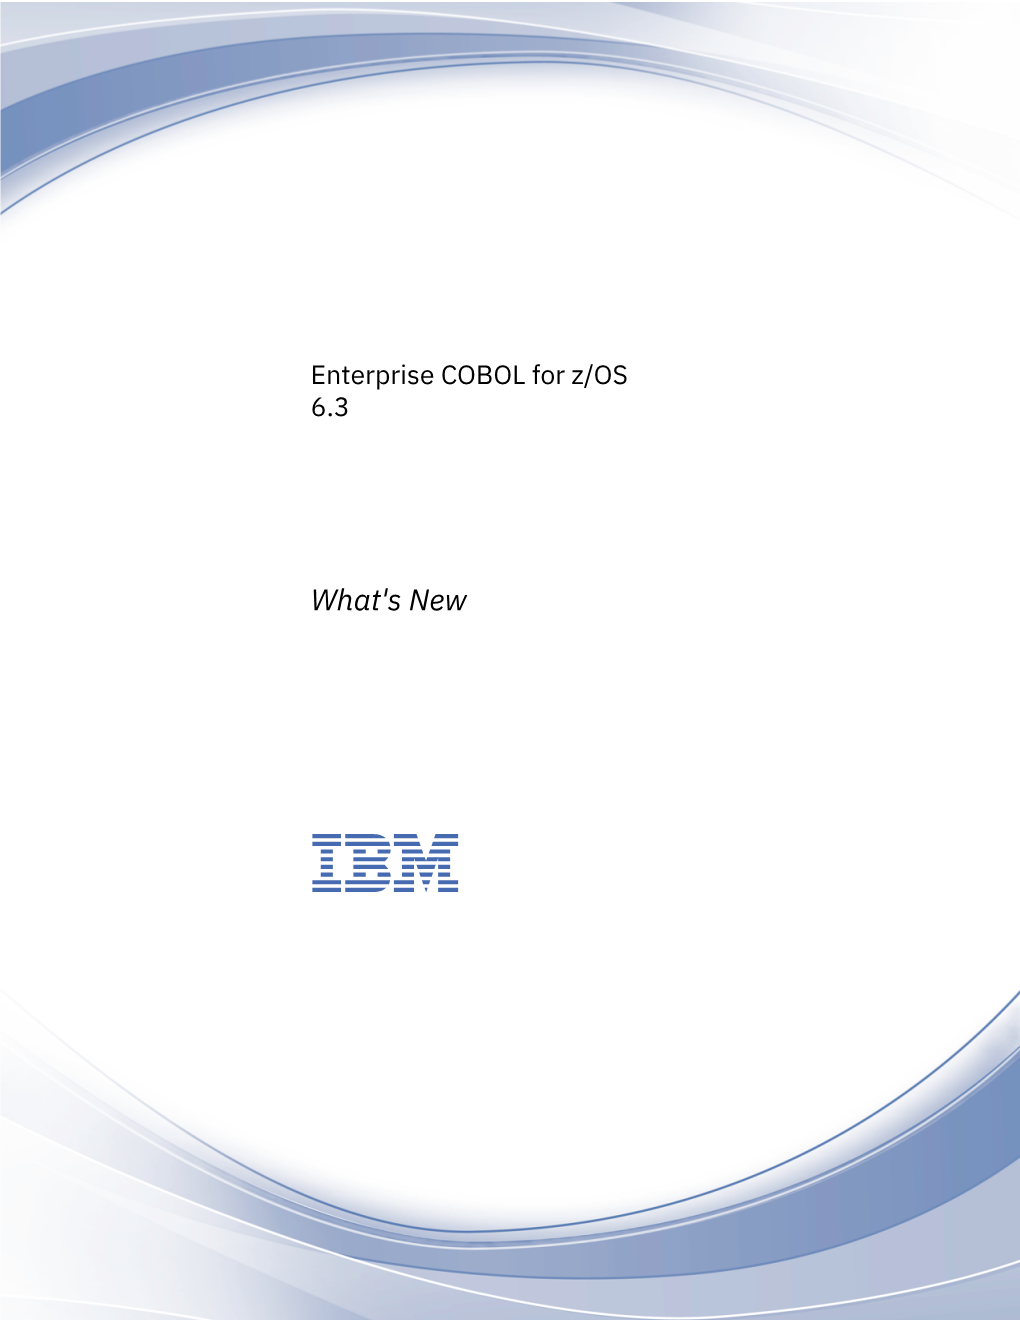 Enterprise COBOL for Z/OS, 6.3 What's New How to Send Your Comments